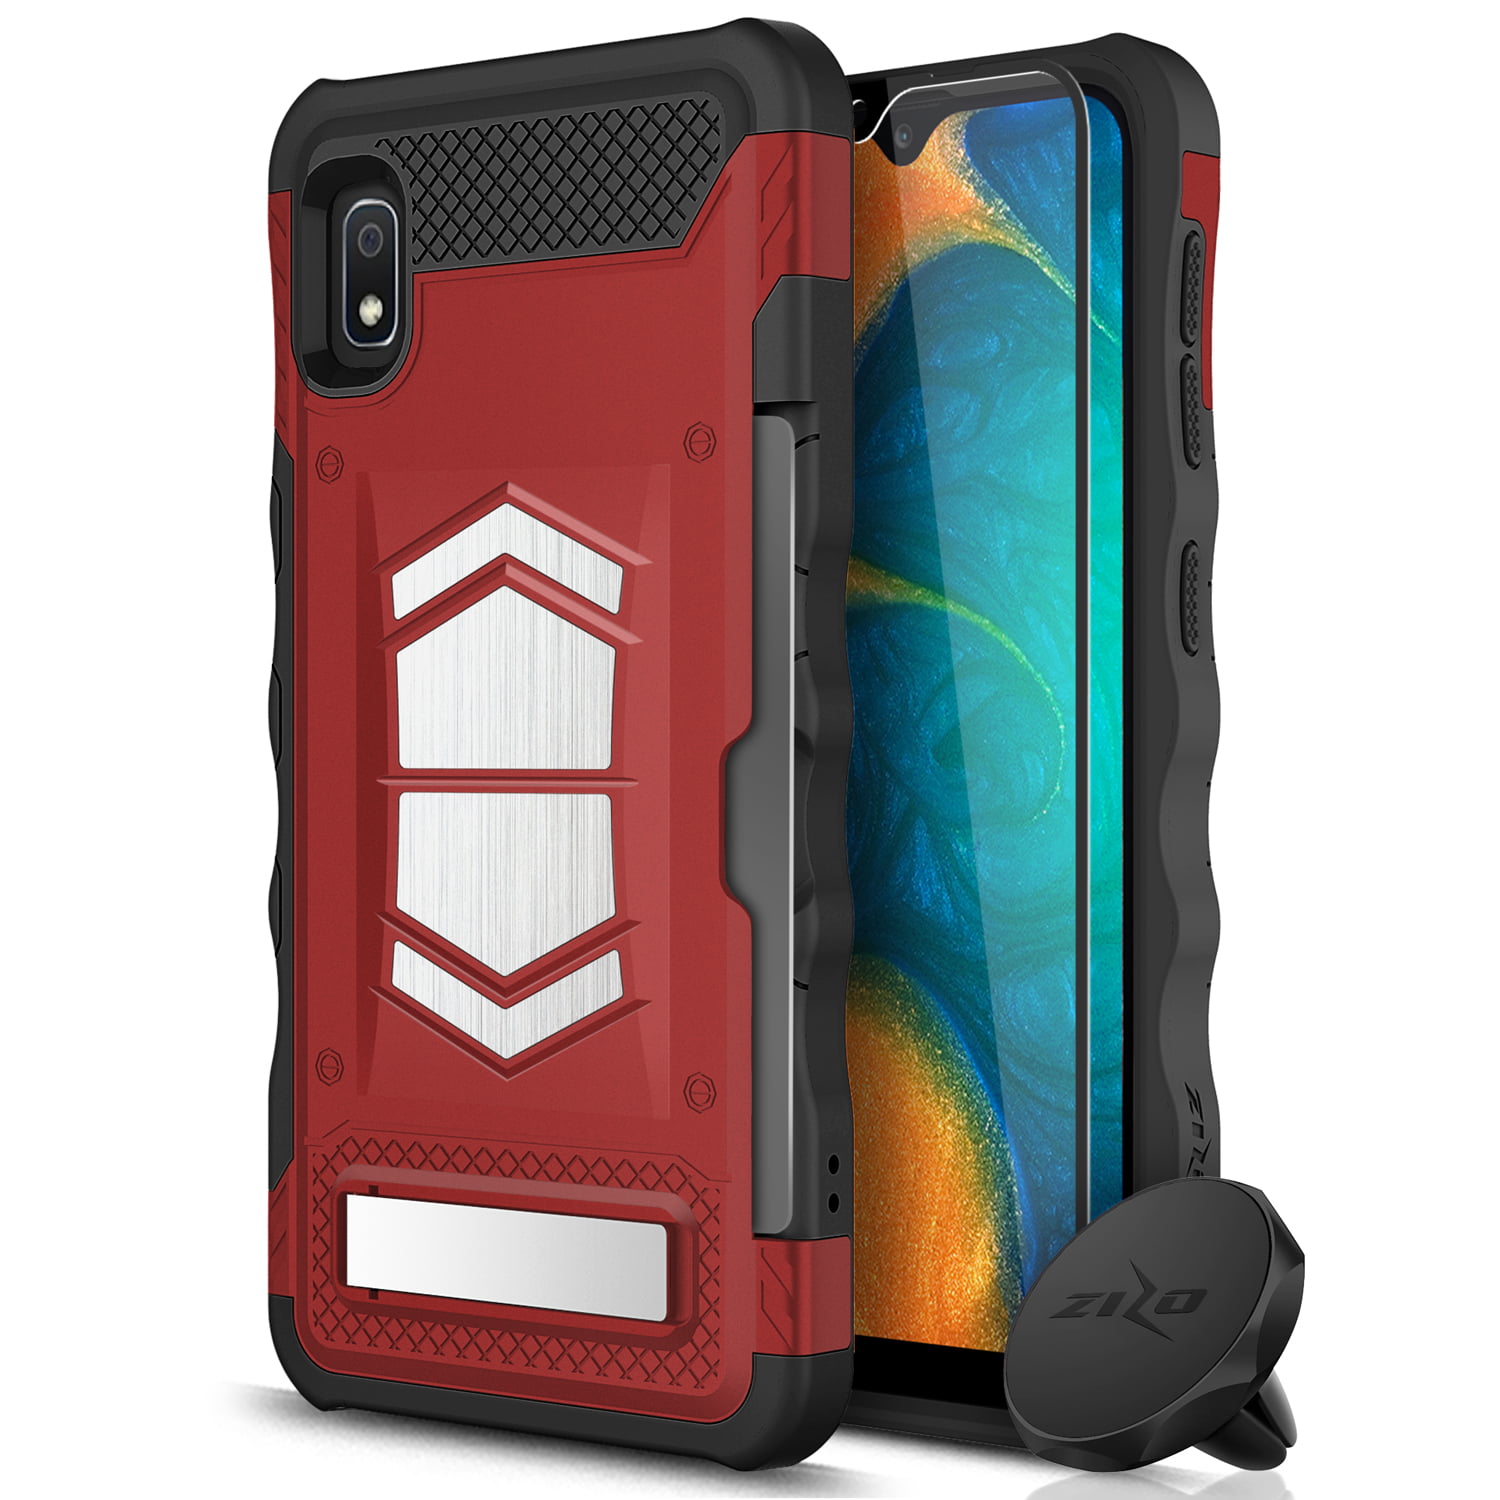 ZIZO Electro Series for Samsung Galaxy S10 with Card Slot and Air Vent Magnetic Holder Red Black 